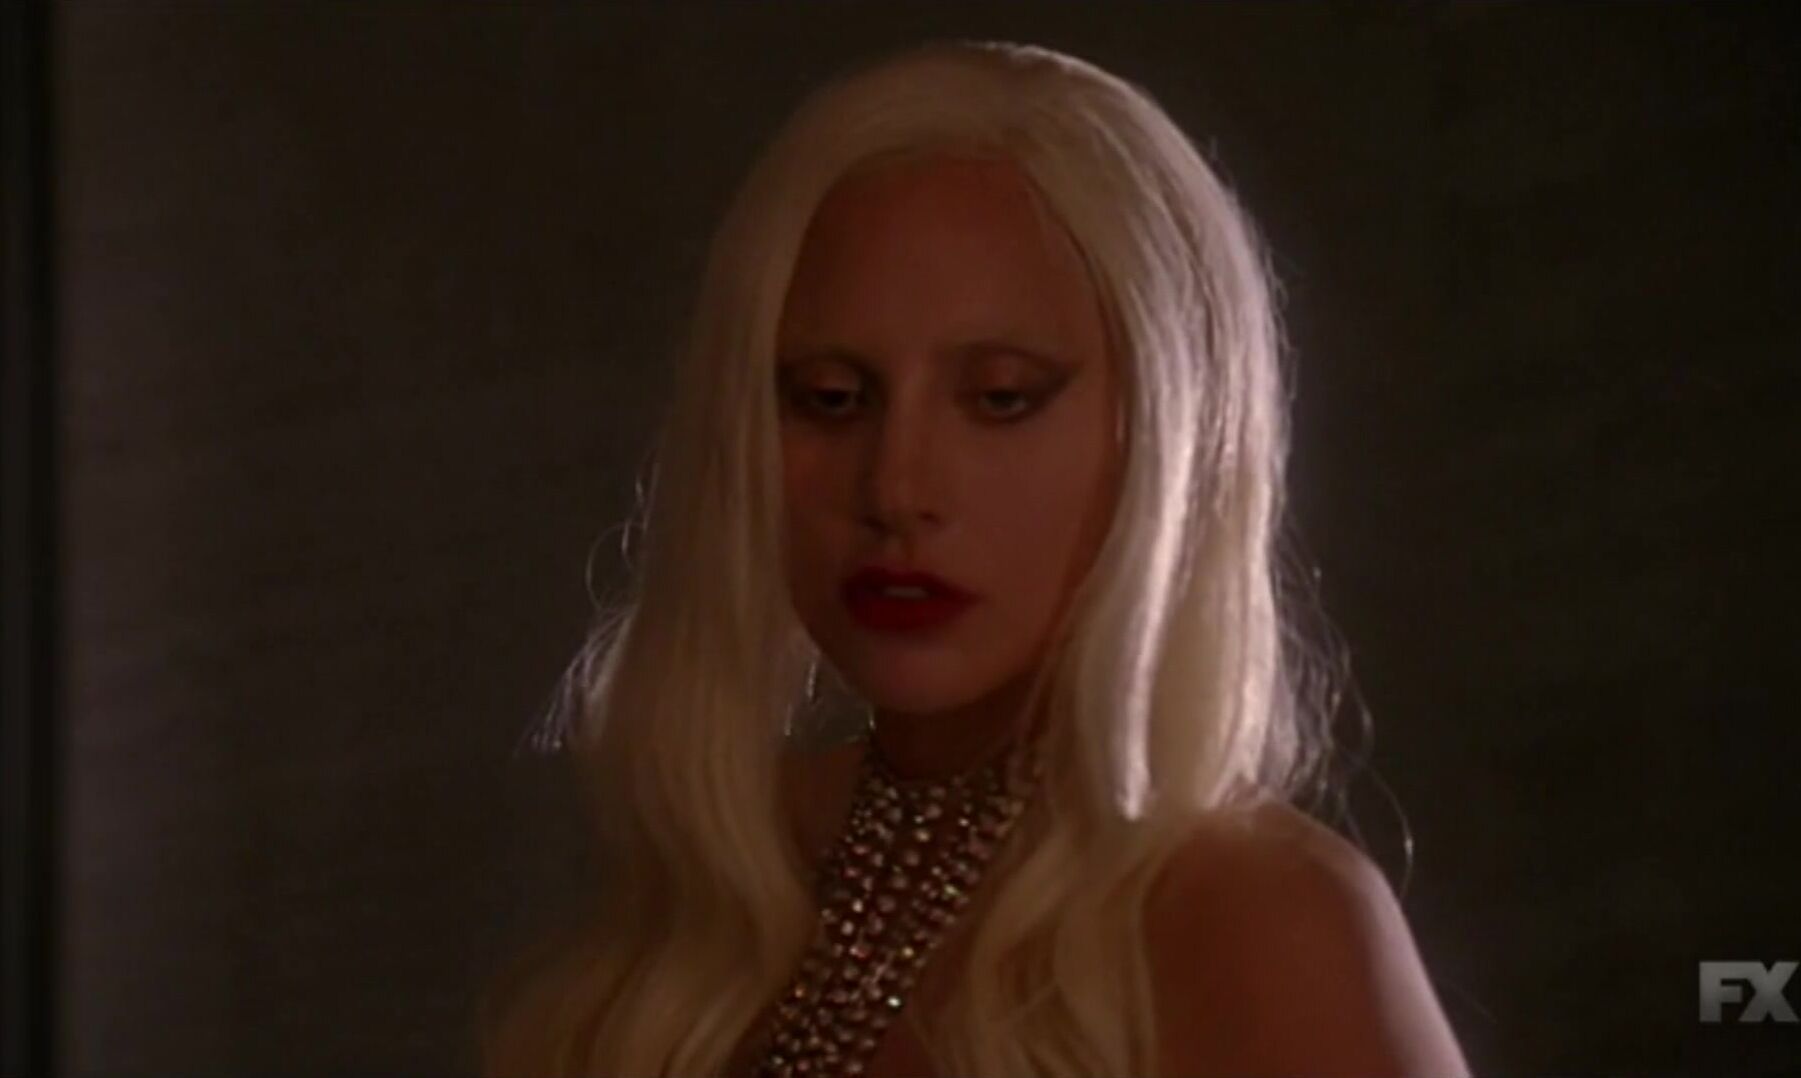 iTeenVideo Lady Gaga and the second beautiful actress do it in TV series American Horror Story Lezbi